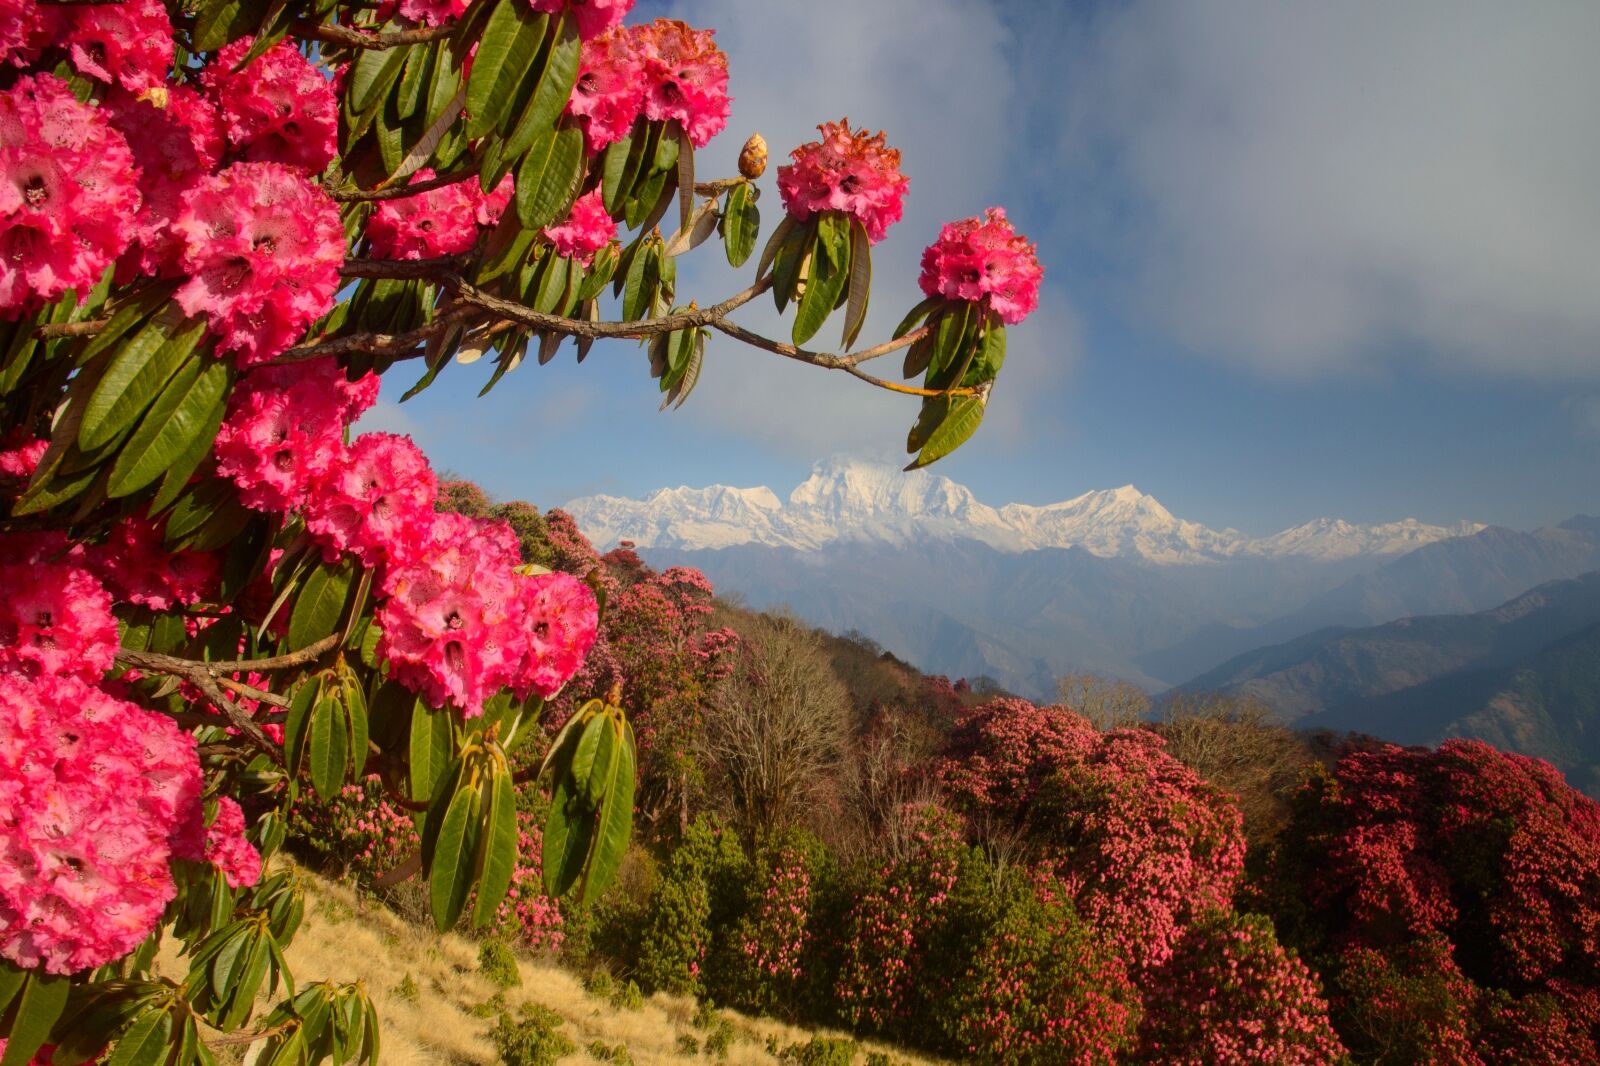 Himalaya Mountains range with red rhododendron flowers that bees use to produce mad honey